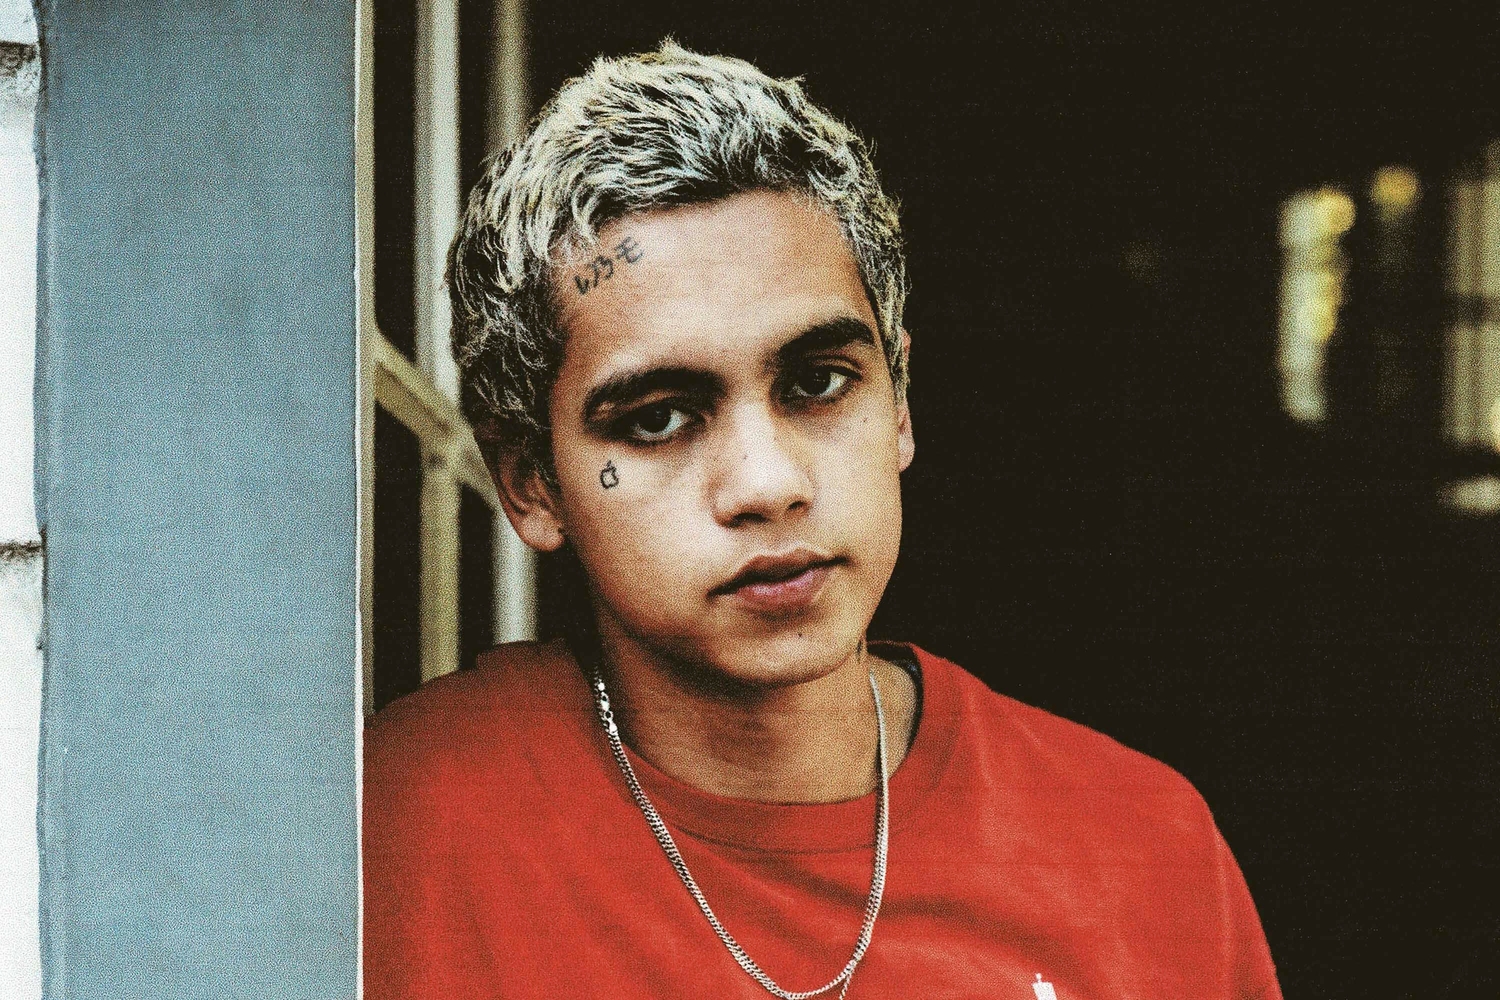 Dominic Fike shares new single ‘Dancing in the Courthouse’